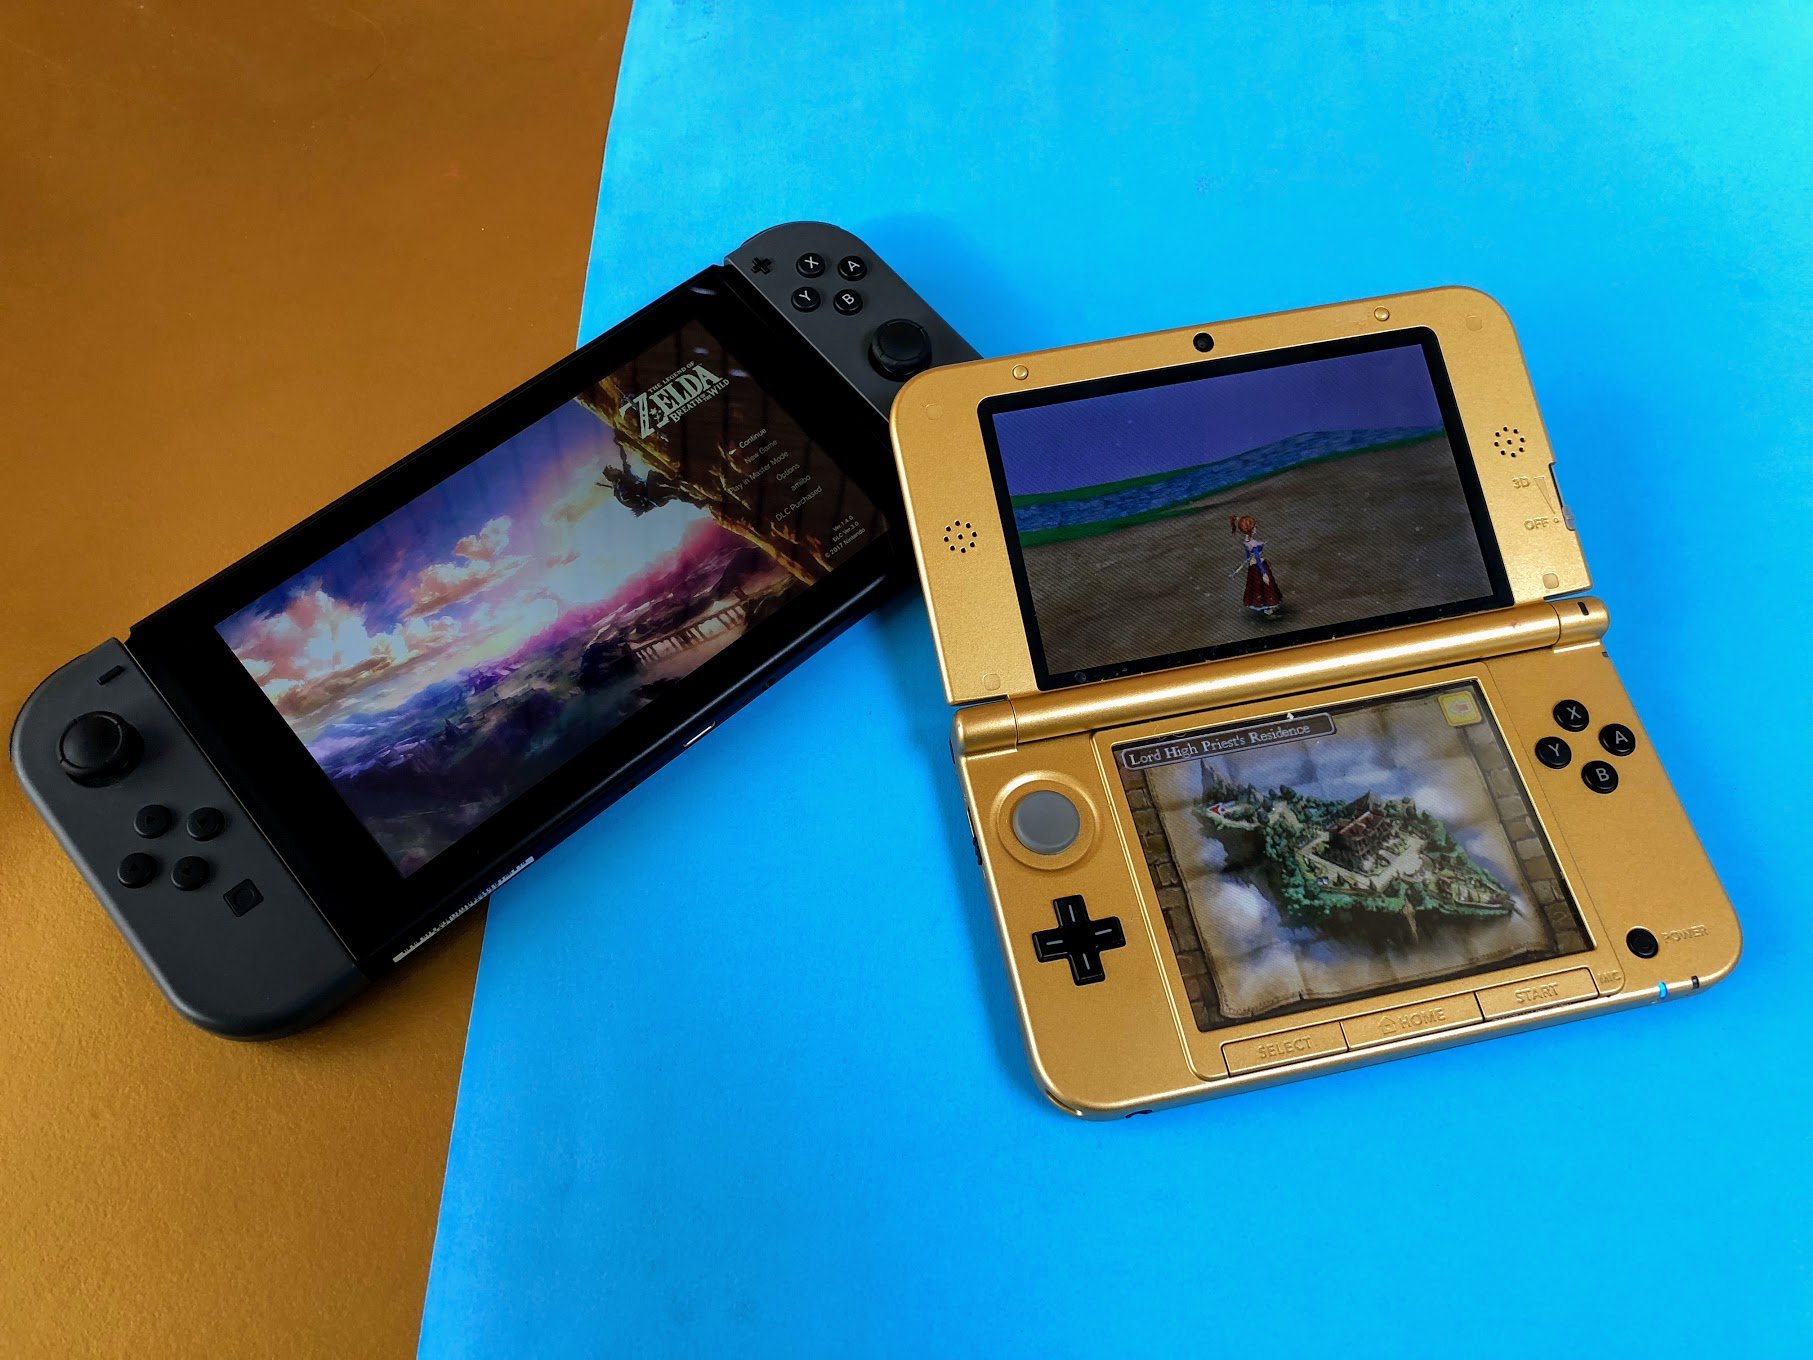 Nintendo Switch vs. Nintendo 3DS: Which should you buy? | iMore